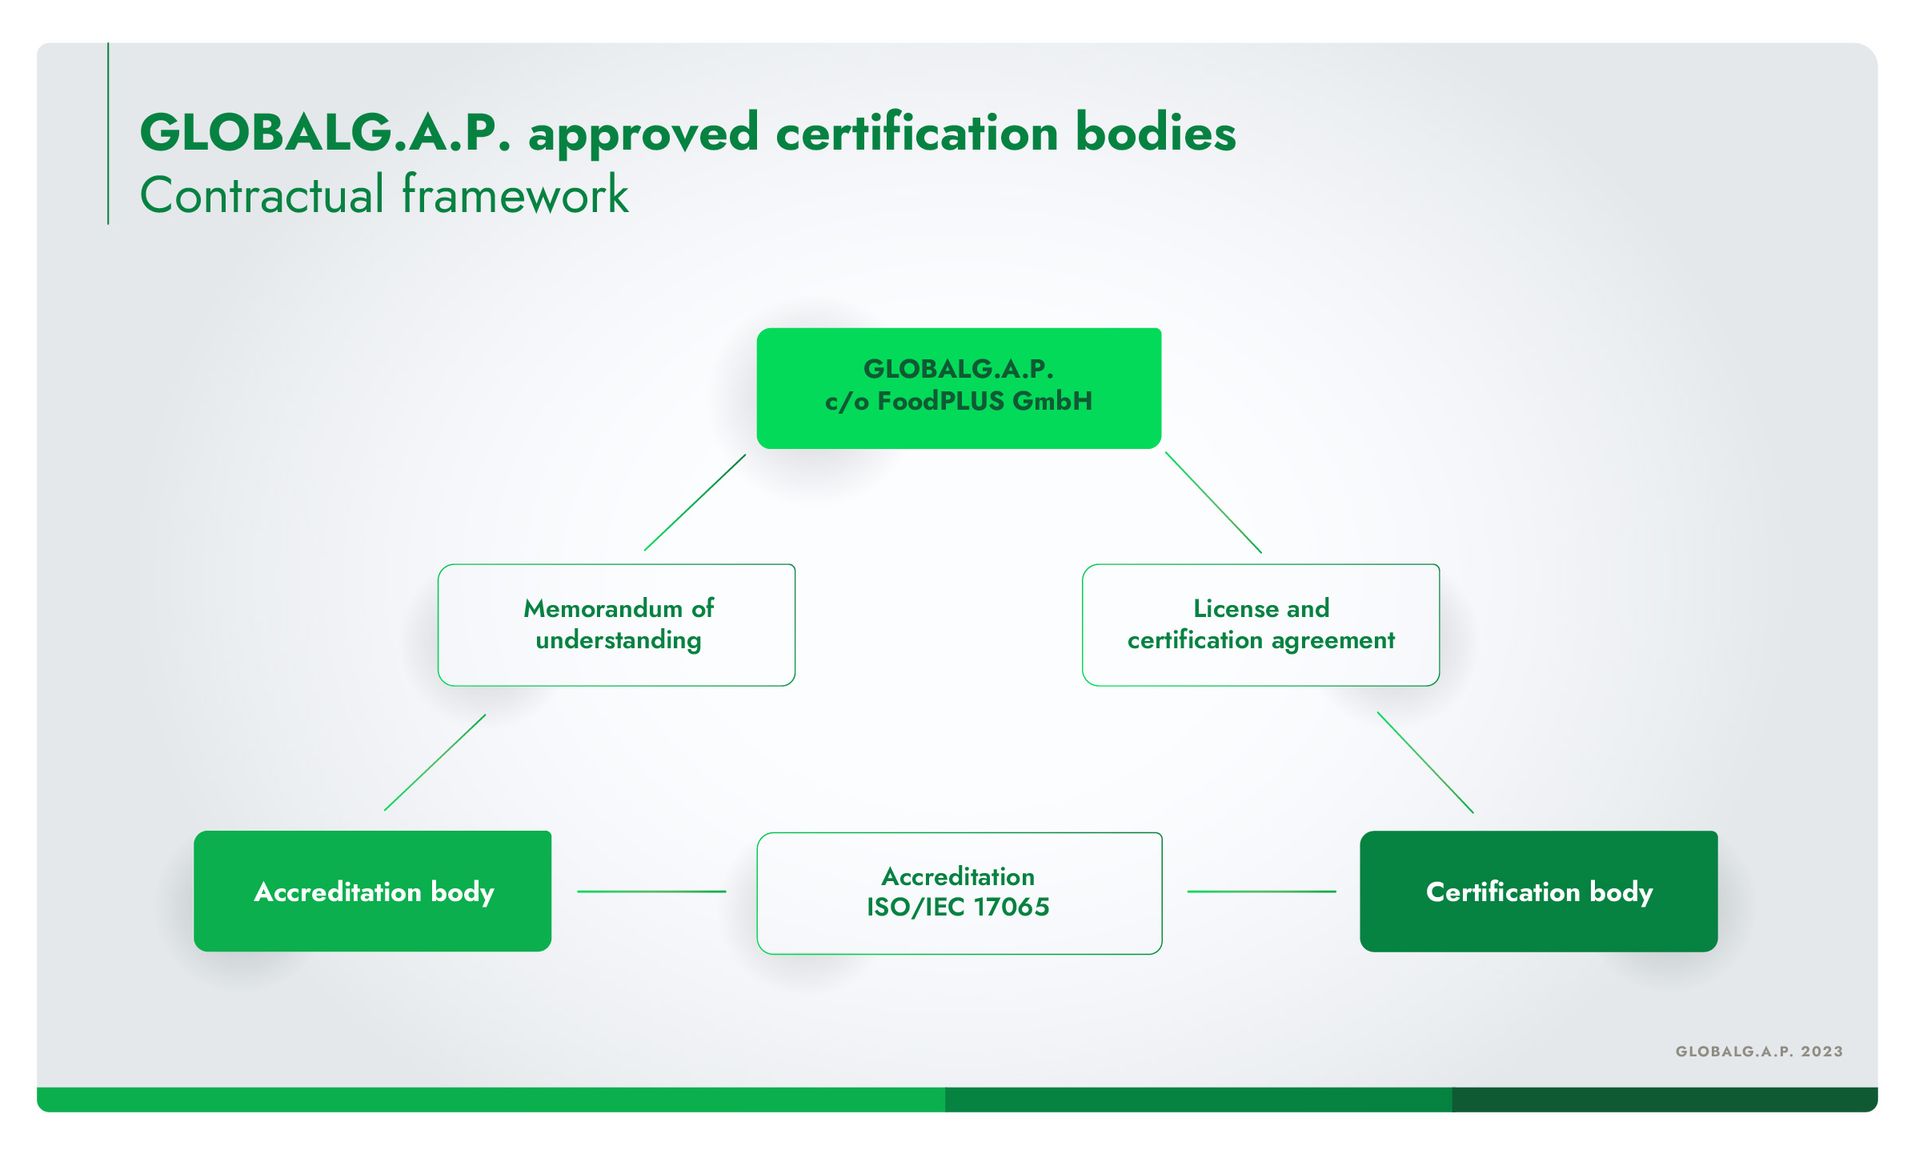 Contractual framework for GLOBALG.A.P. approved certification bodies